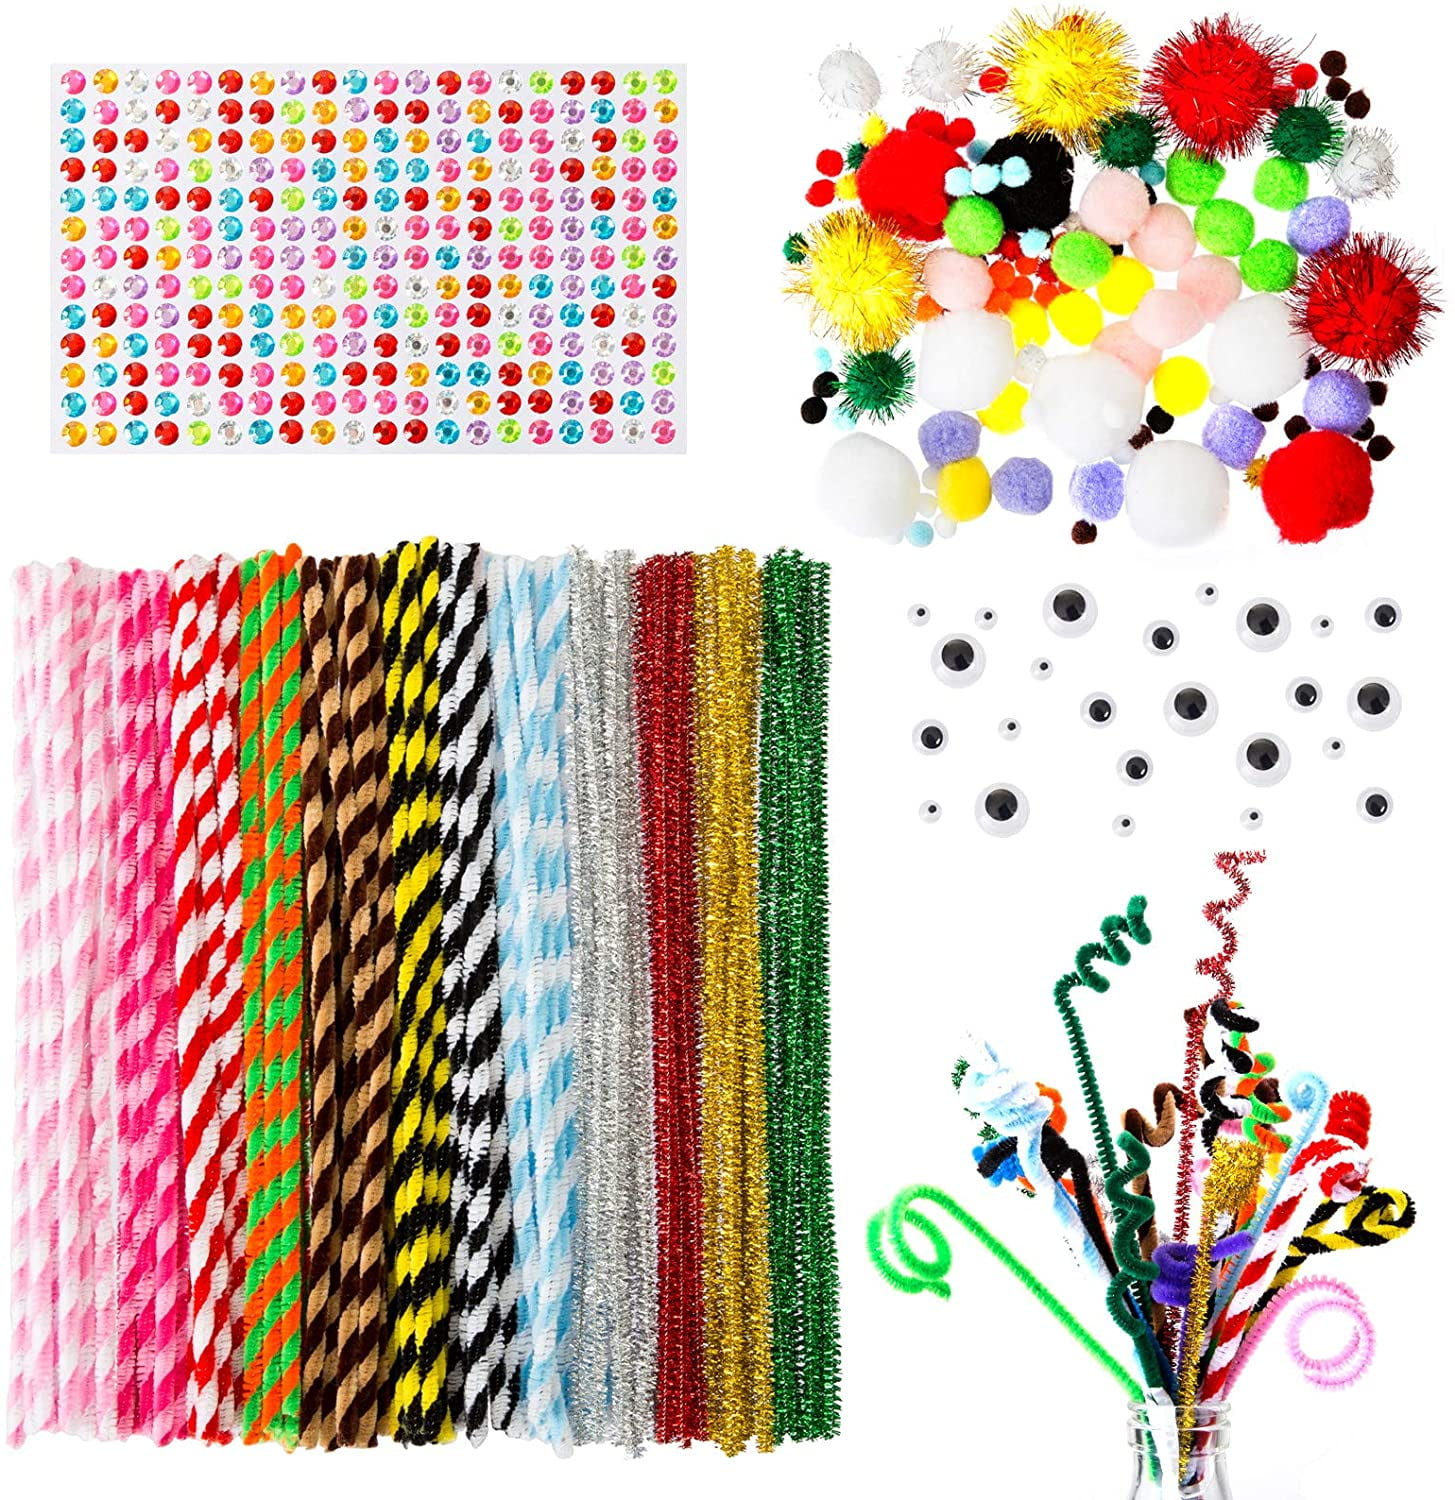 Eqwljwe Pipe Cleaners Craft Supplies - 100pcs 10 Colors Pipecleaners Craft Kids DIY Art Supplies, Pipe Cleaner Chenille Stems, Multi-Color Pipe